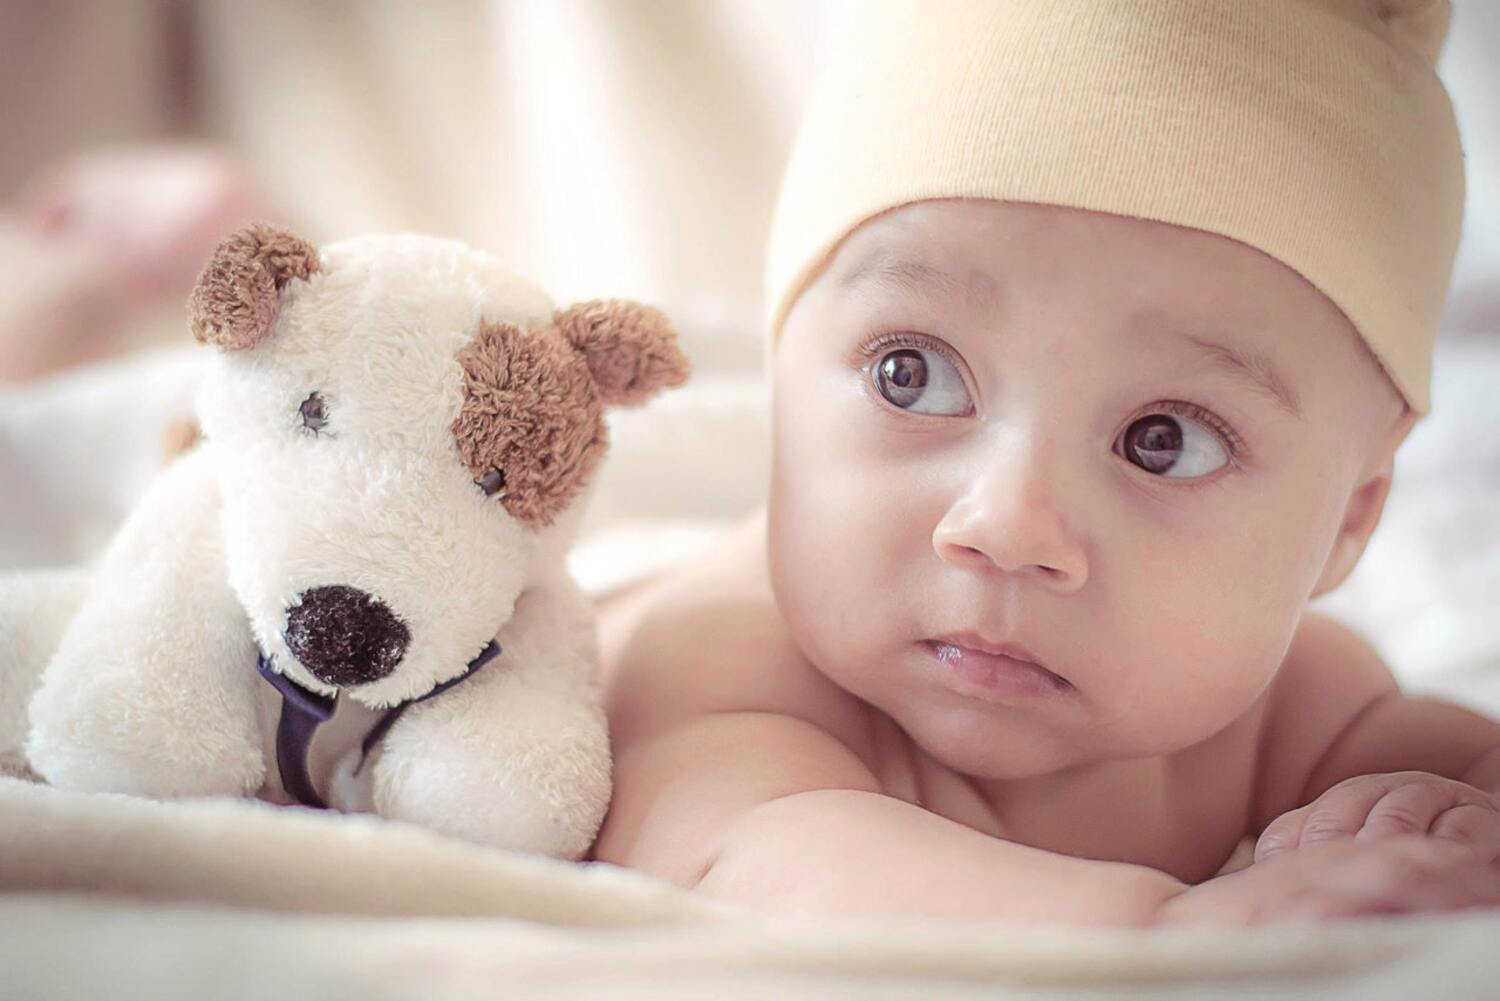 Newborn baby looking to the side with stuffed dog toy